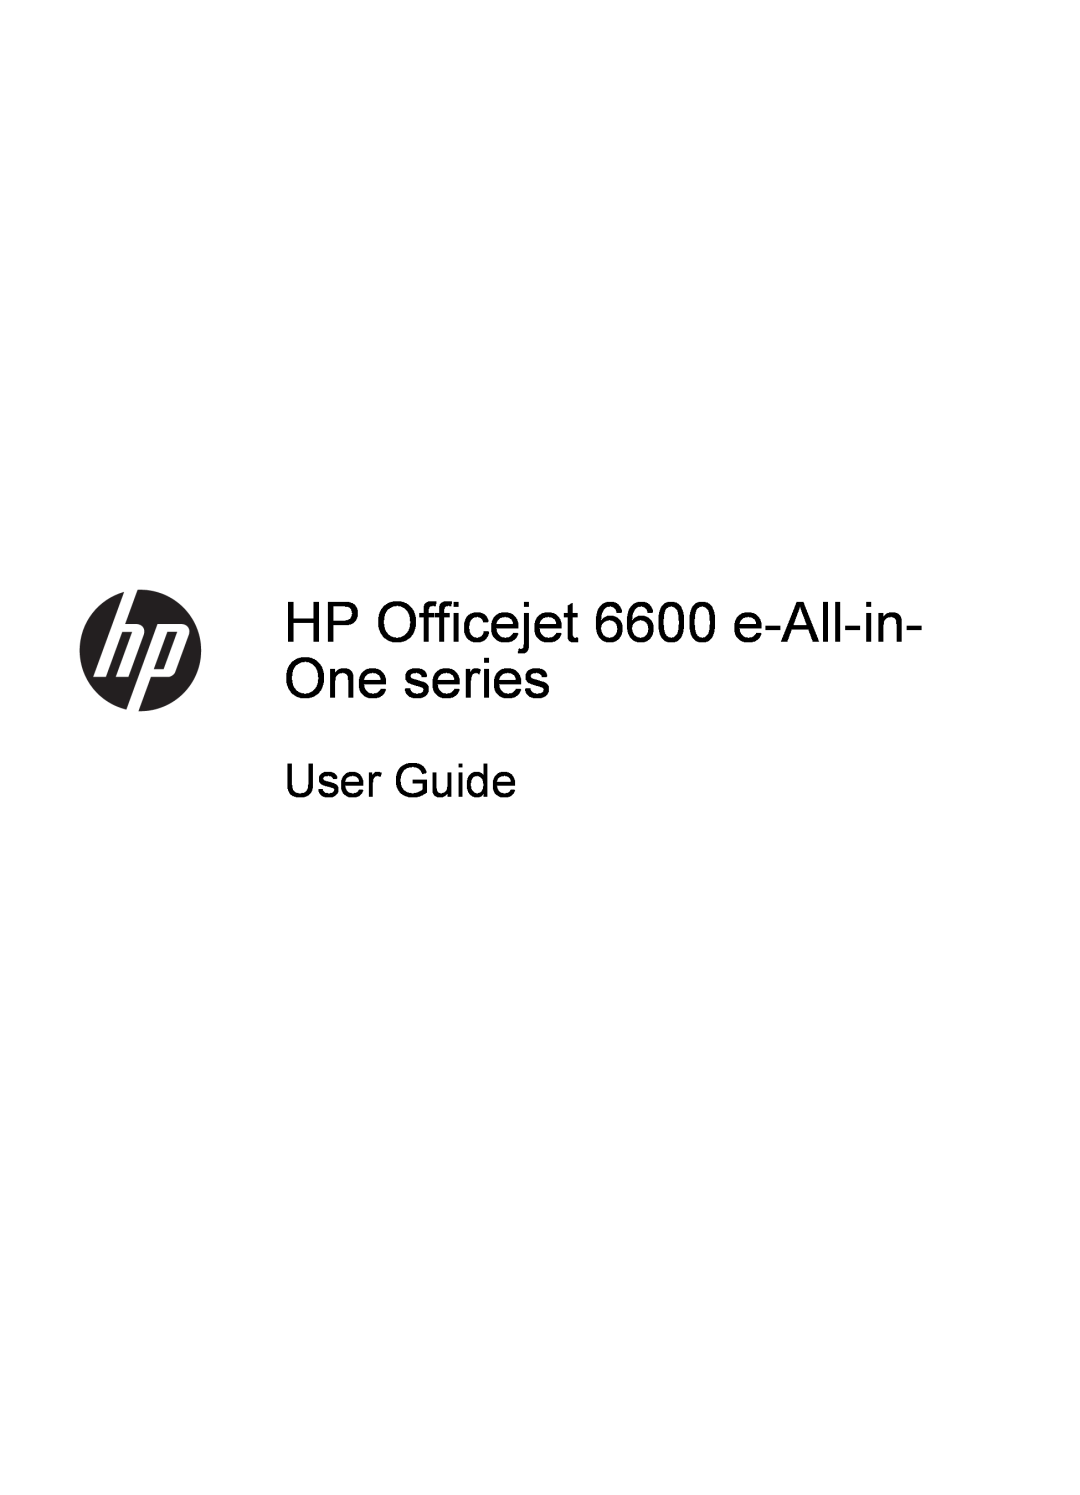 HP 6600 - H7 manual HP Officejet 6600 e-All-in- One series, User Guide 